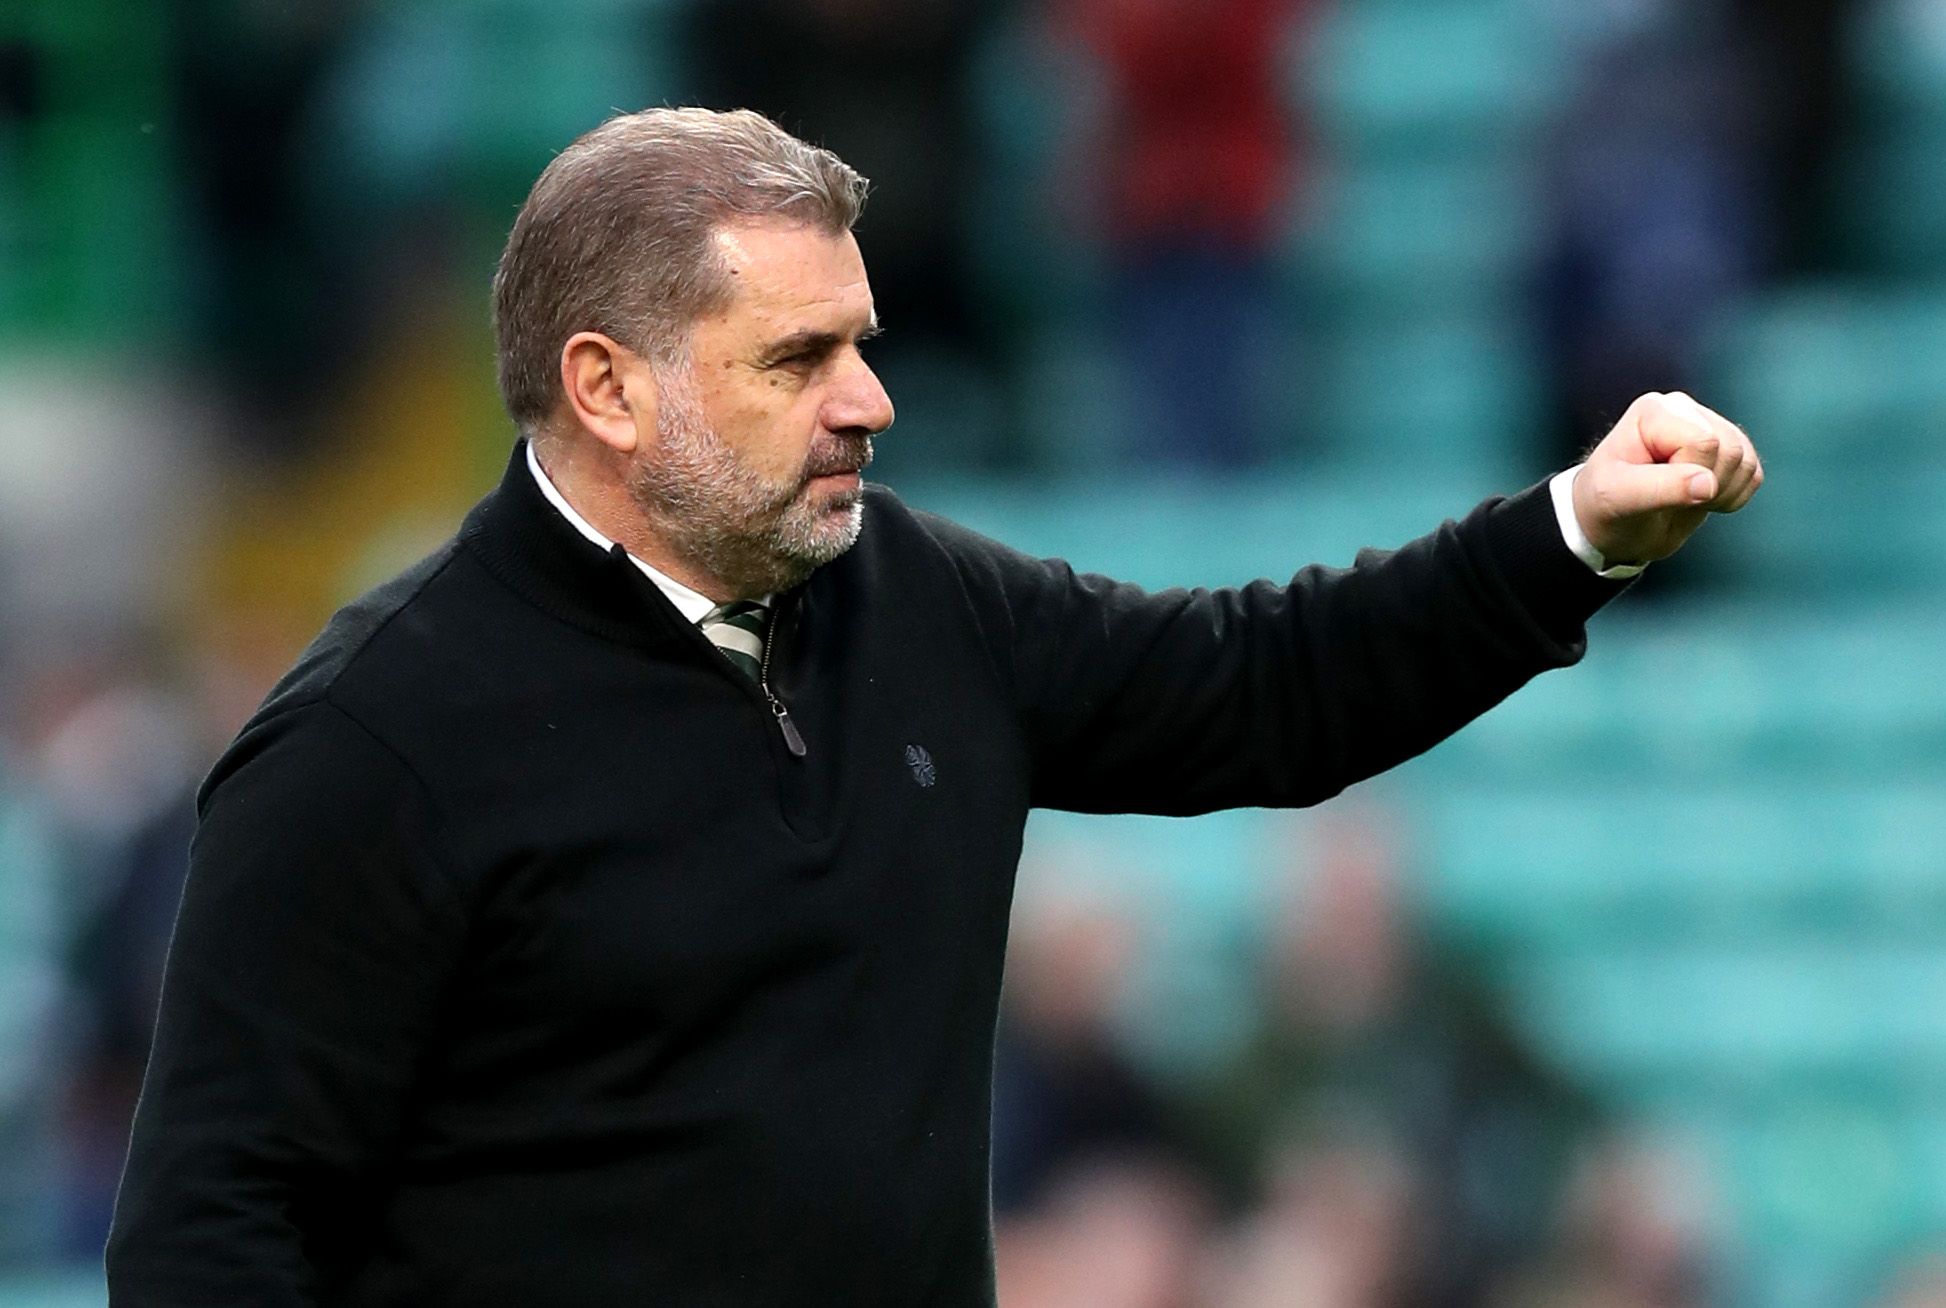 Soccer Football - Europa League - Group G - Celtic v Ferencvaros - Celtic Park, Glasgow, Scotland, Britain - October 19, 2021 Celtic manager Ange Postecoglou acknowledges the fans after the match REUTERS/Russell Cheyne